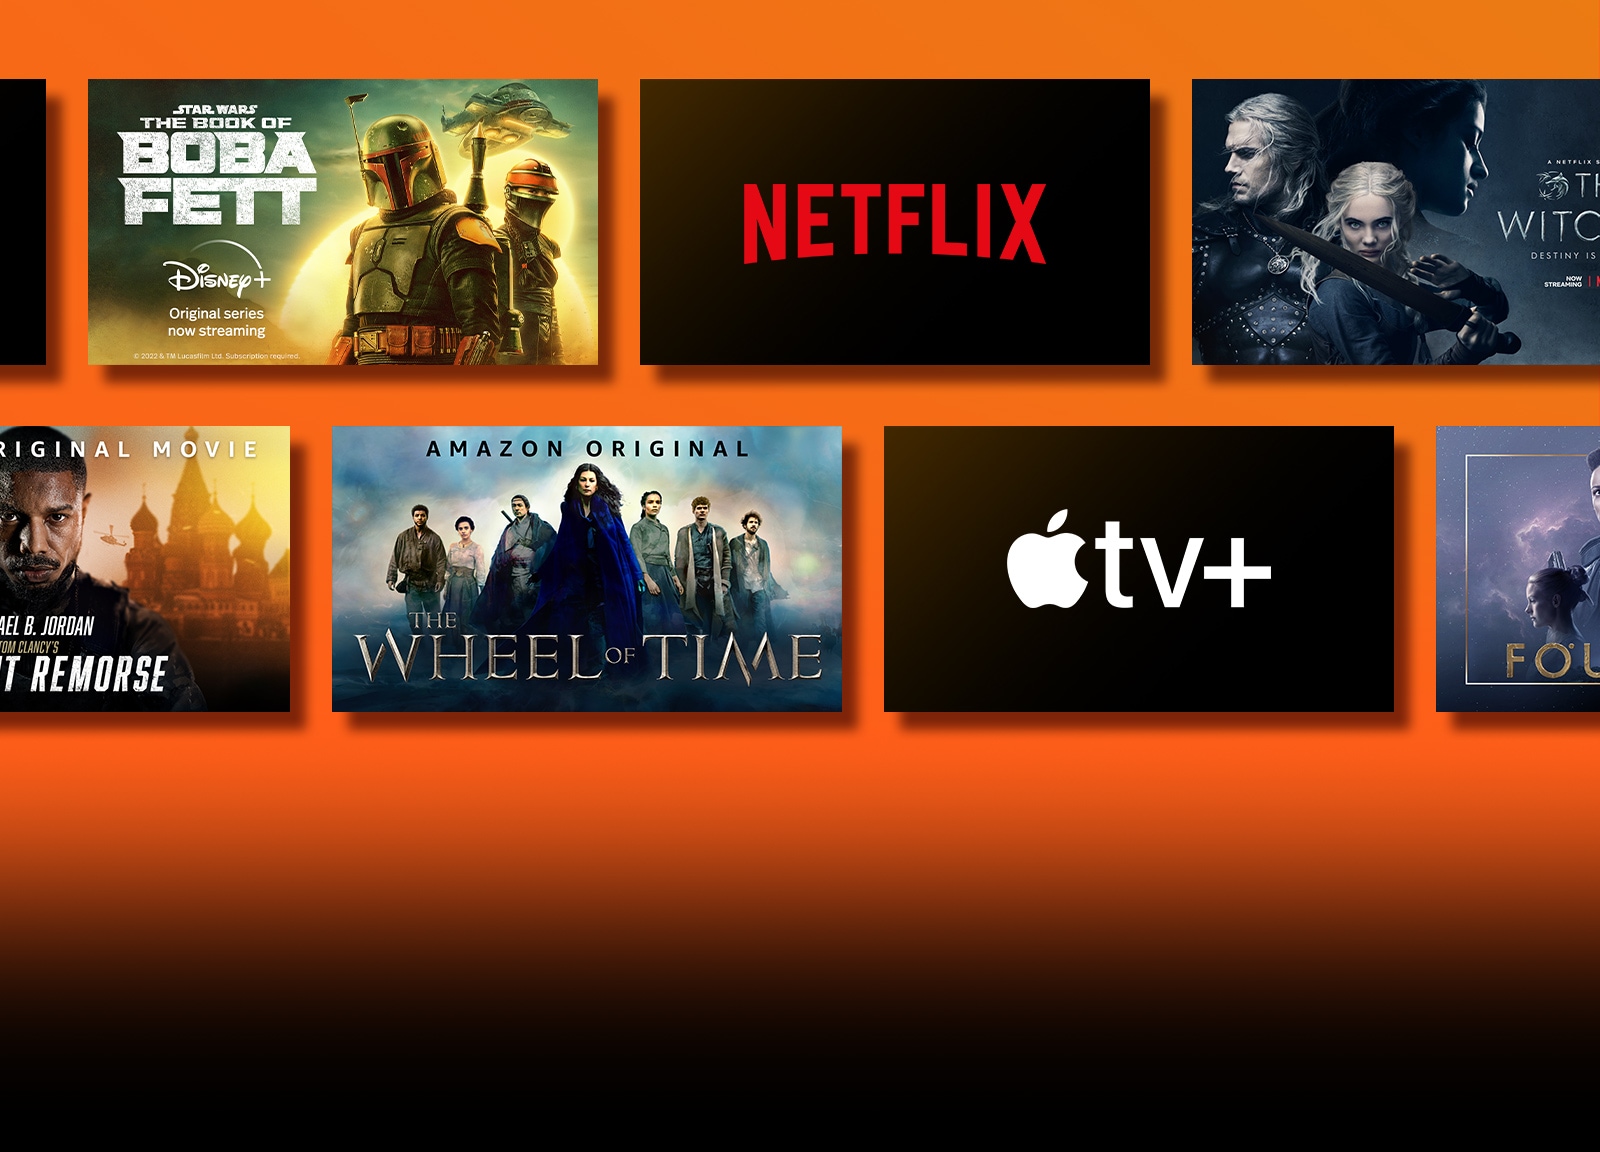 There are logos of streaming service platforms and matching footages right next to each logo. Netflix logo and money heist and the Witcher. Prime Video logo and Without Remorse and The Wheel of Time. Livenow logo and mamamoo teaser image and OneUs teaser image. Apple TV plus logo and Foundation and Finch. 